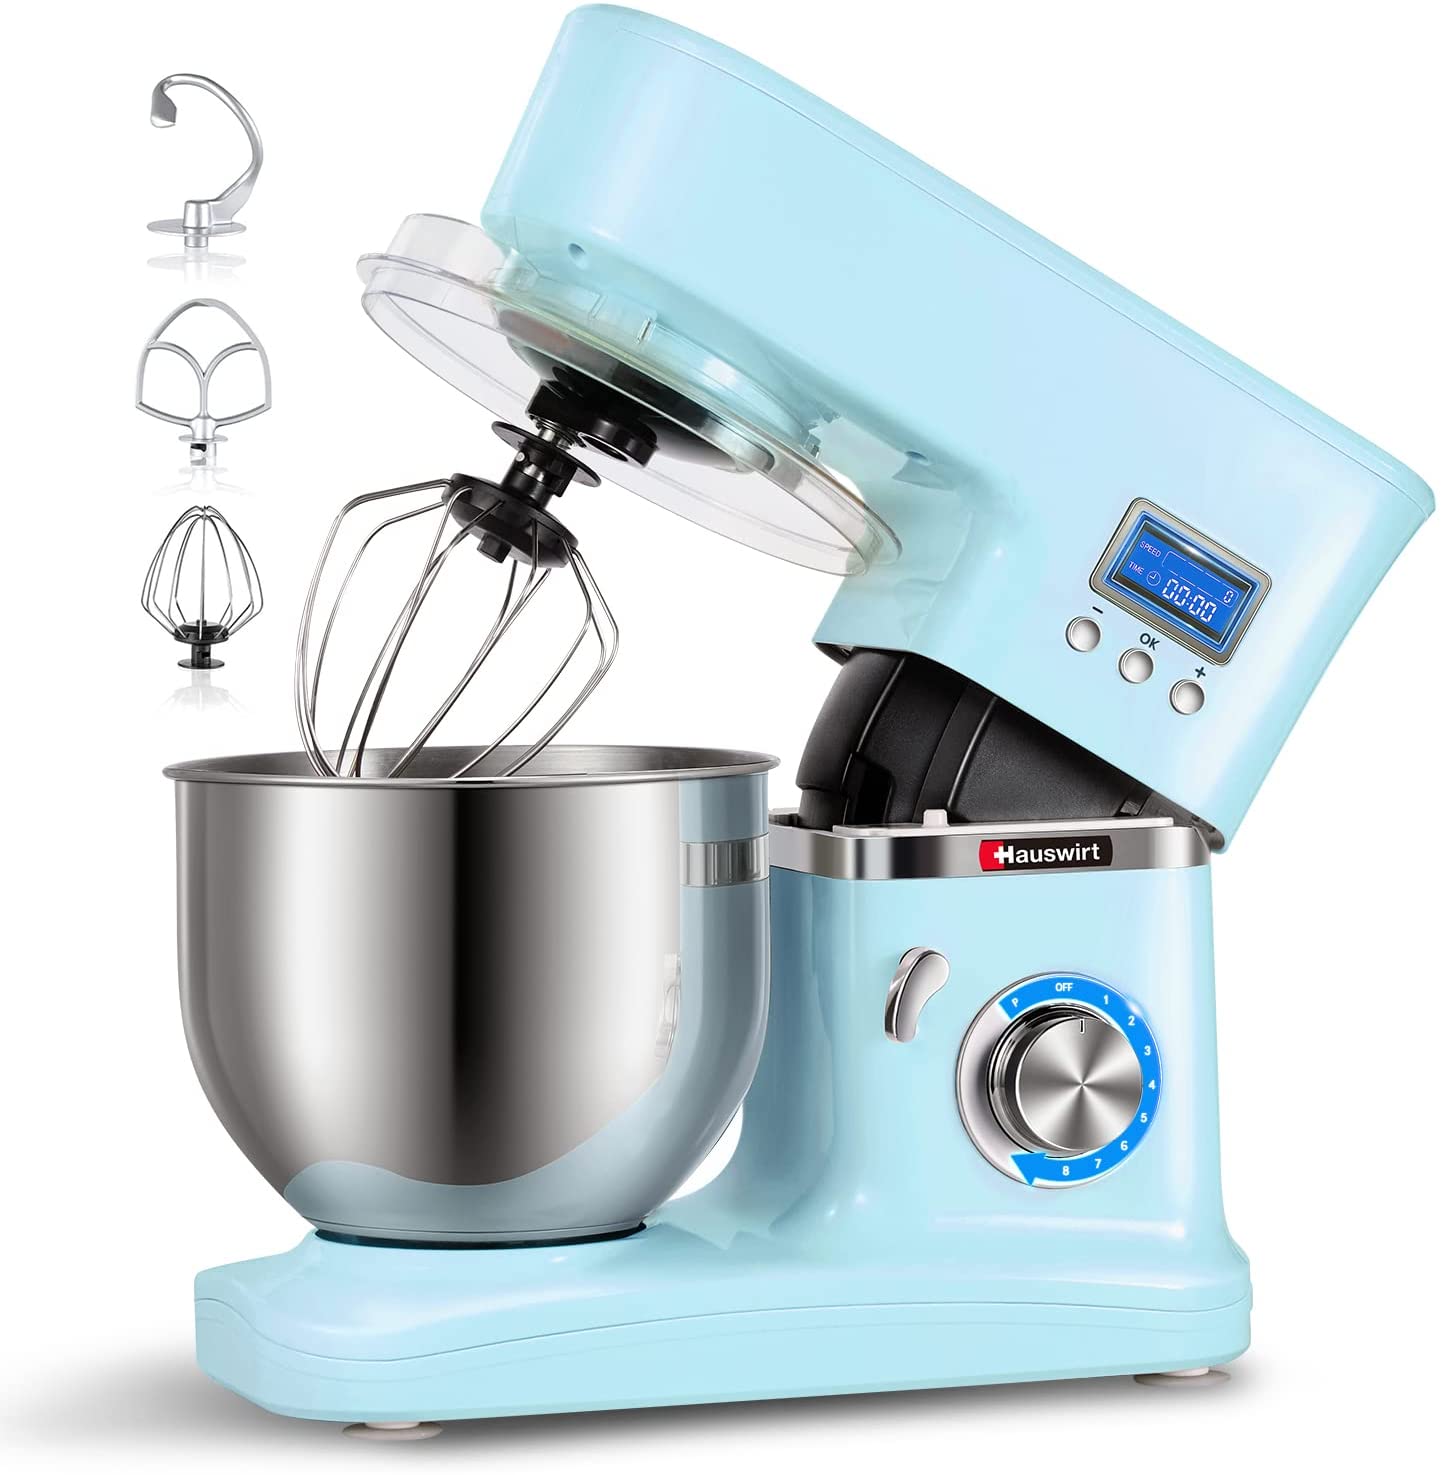 Hauswirt Food Processor, Mixing Machine with LCD Screen, Kneading Machine Dough Machine with Planetary Mixing System, 8 Speed, 5L Stainless Steel Bowl, Whisk, Dough Hook, Whisk, Blue